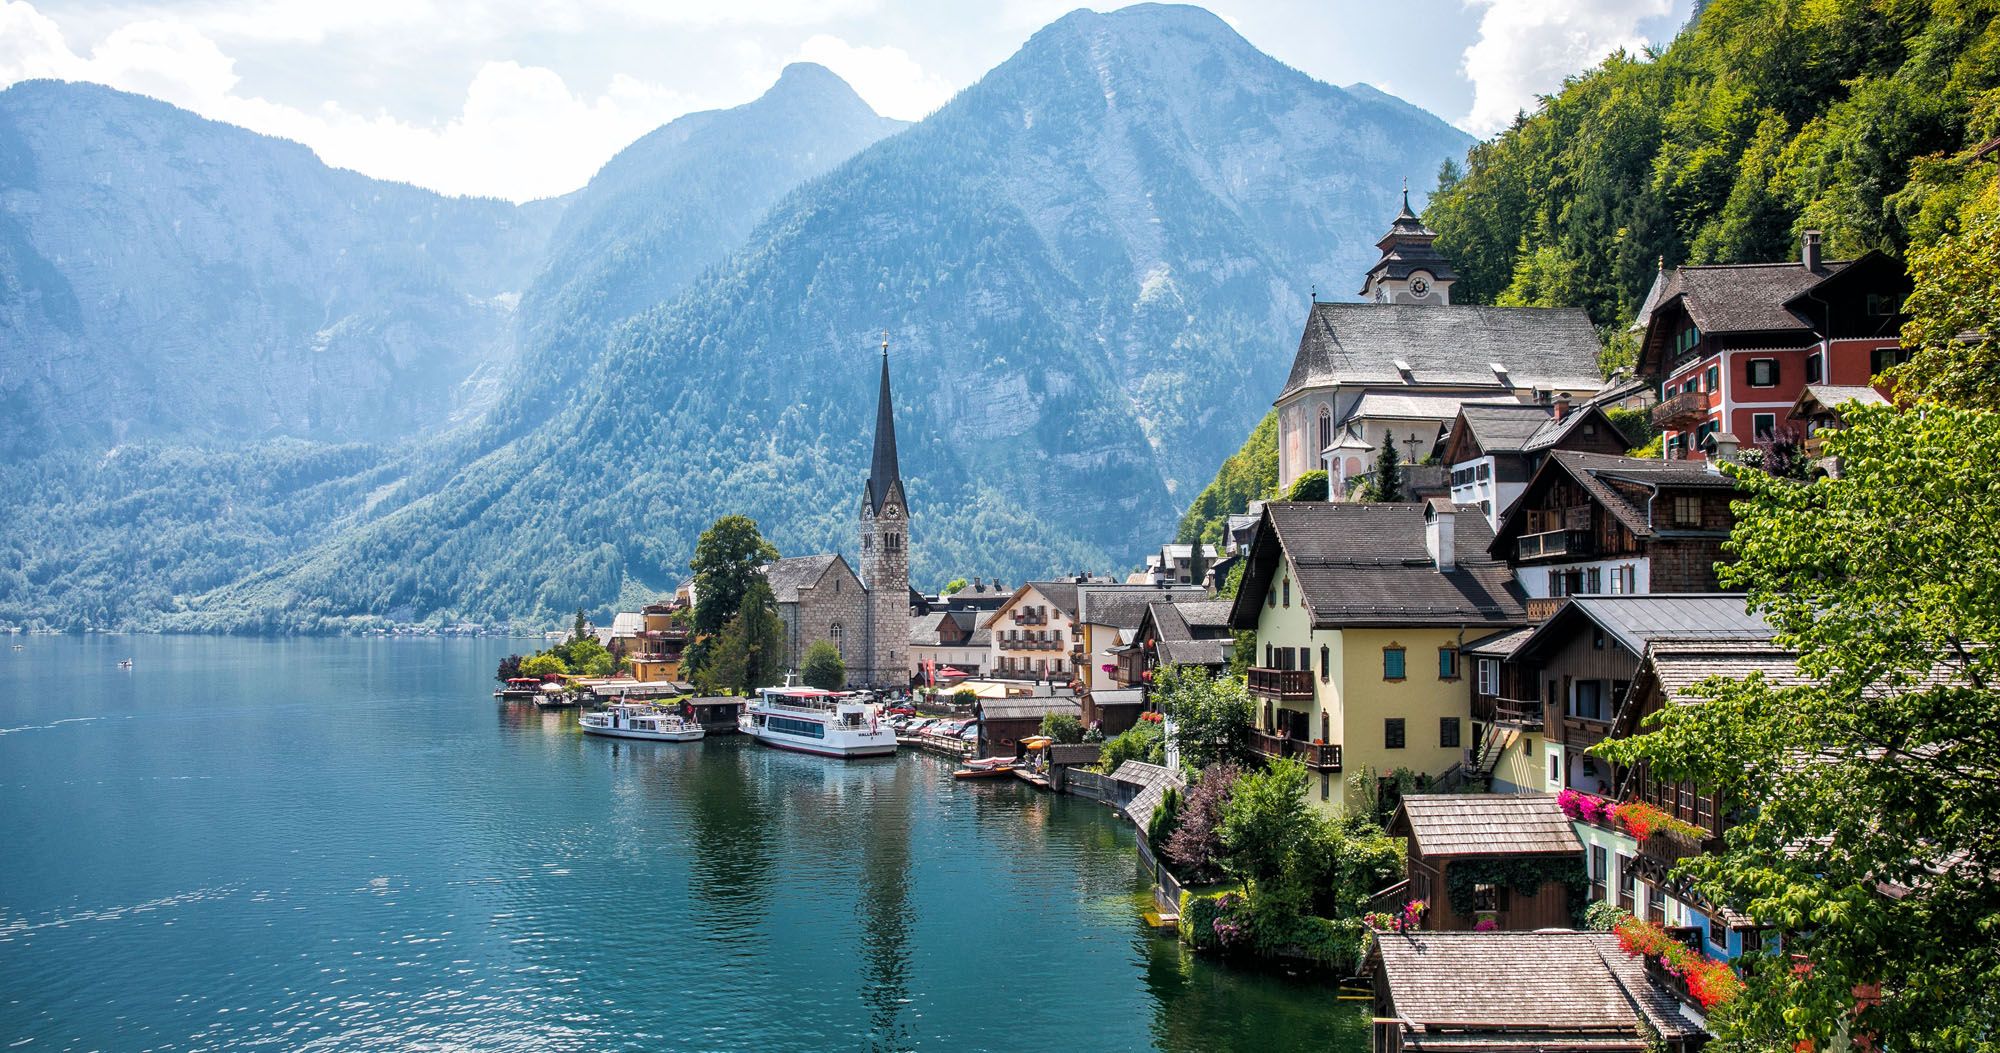 Featured image for “One Perfect Day in Hallstatt, Austria”